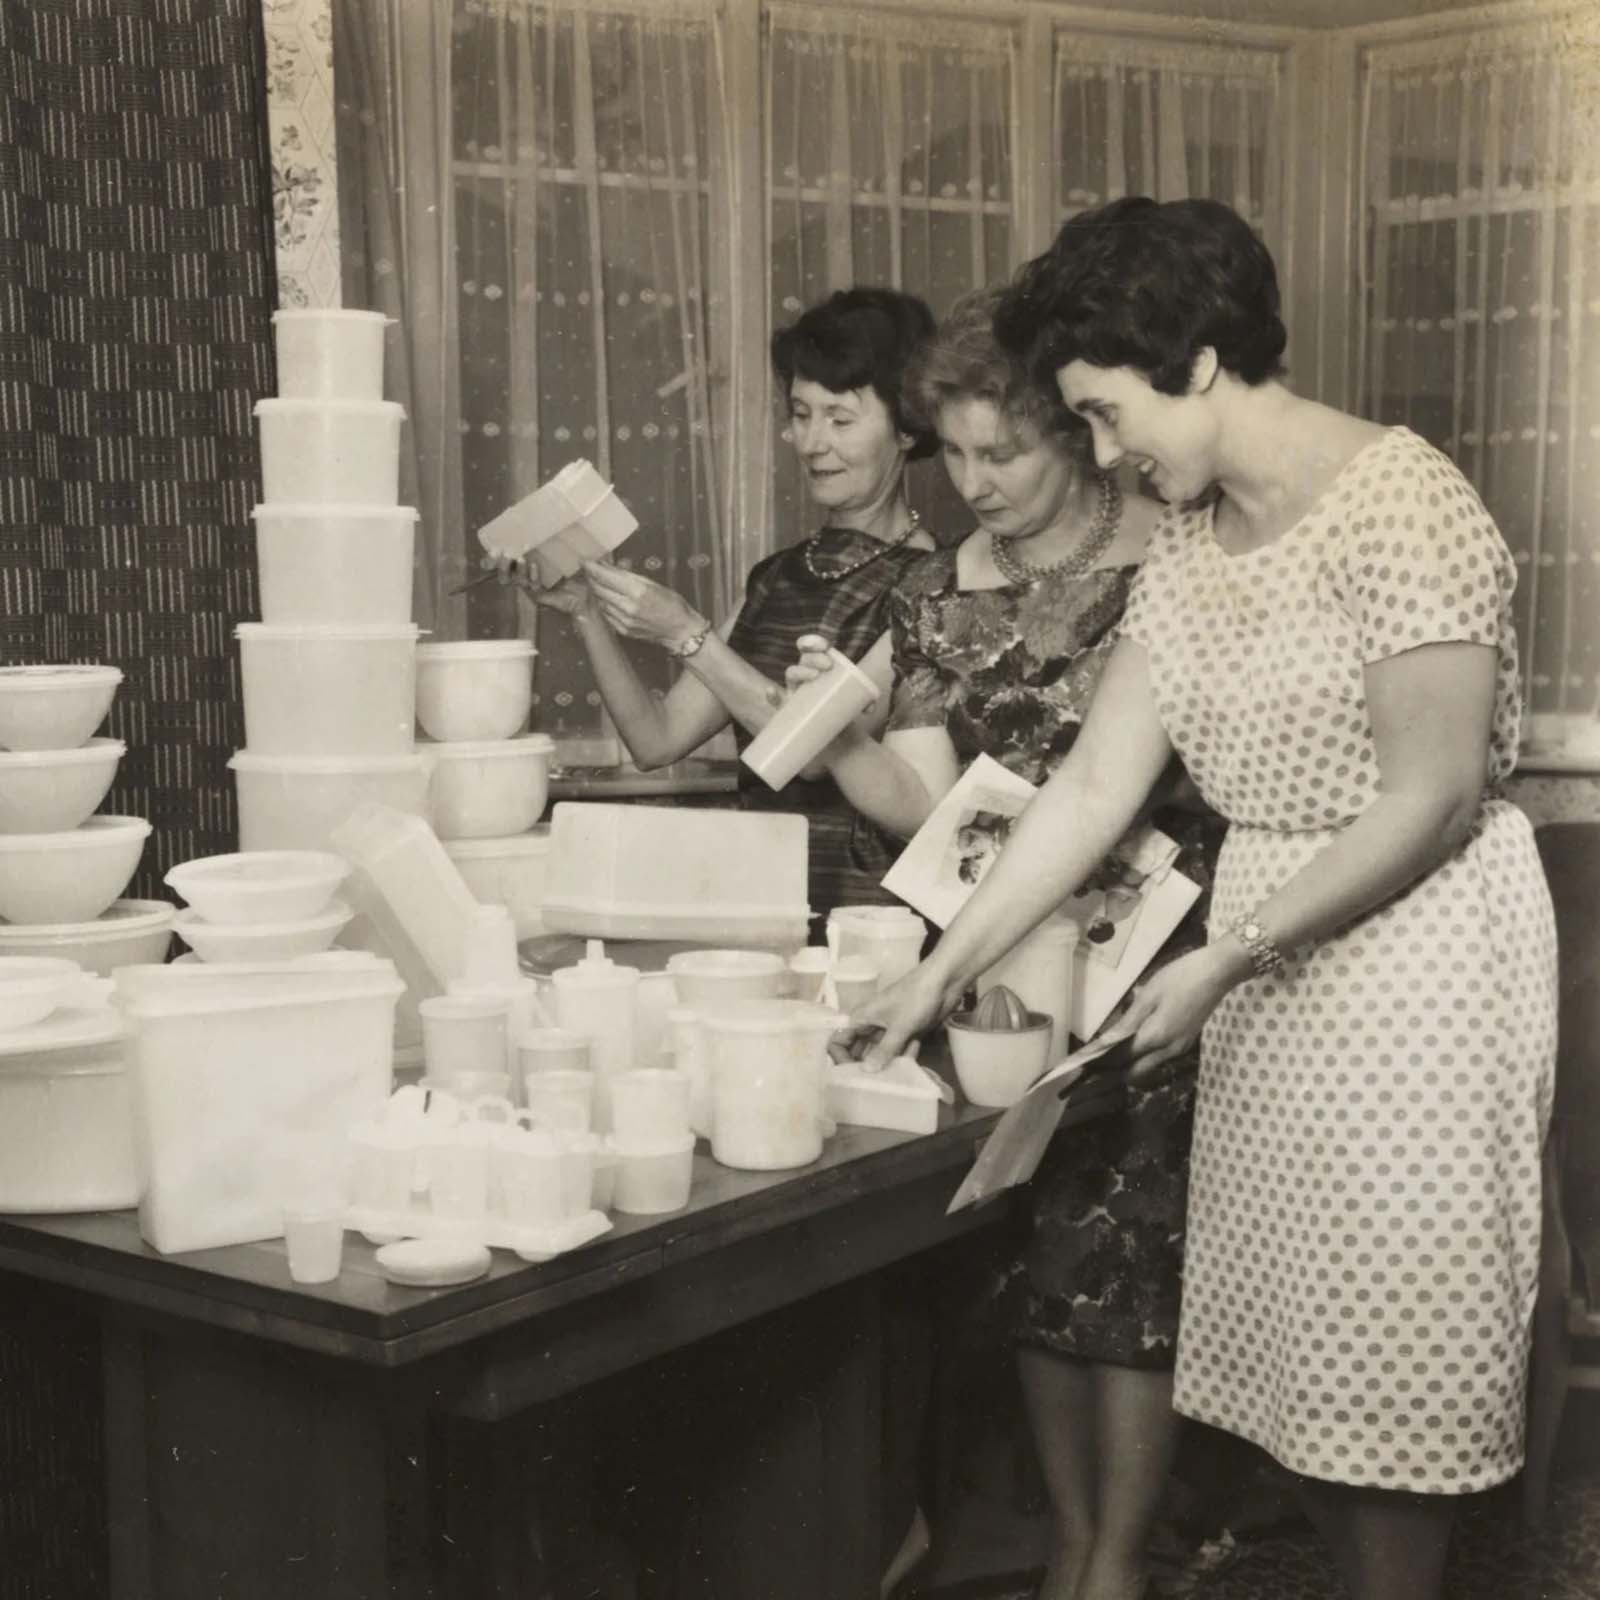 Tupperware Parties’ in the 50s and 60s were a way of marketing the product directly to women.